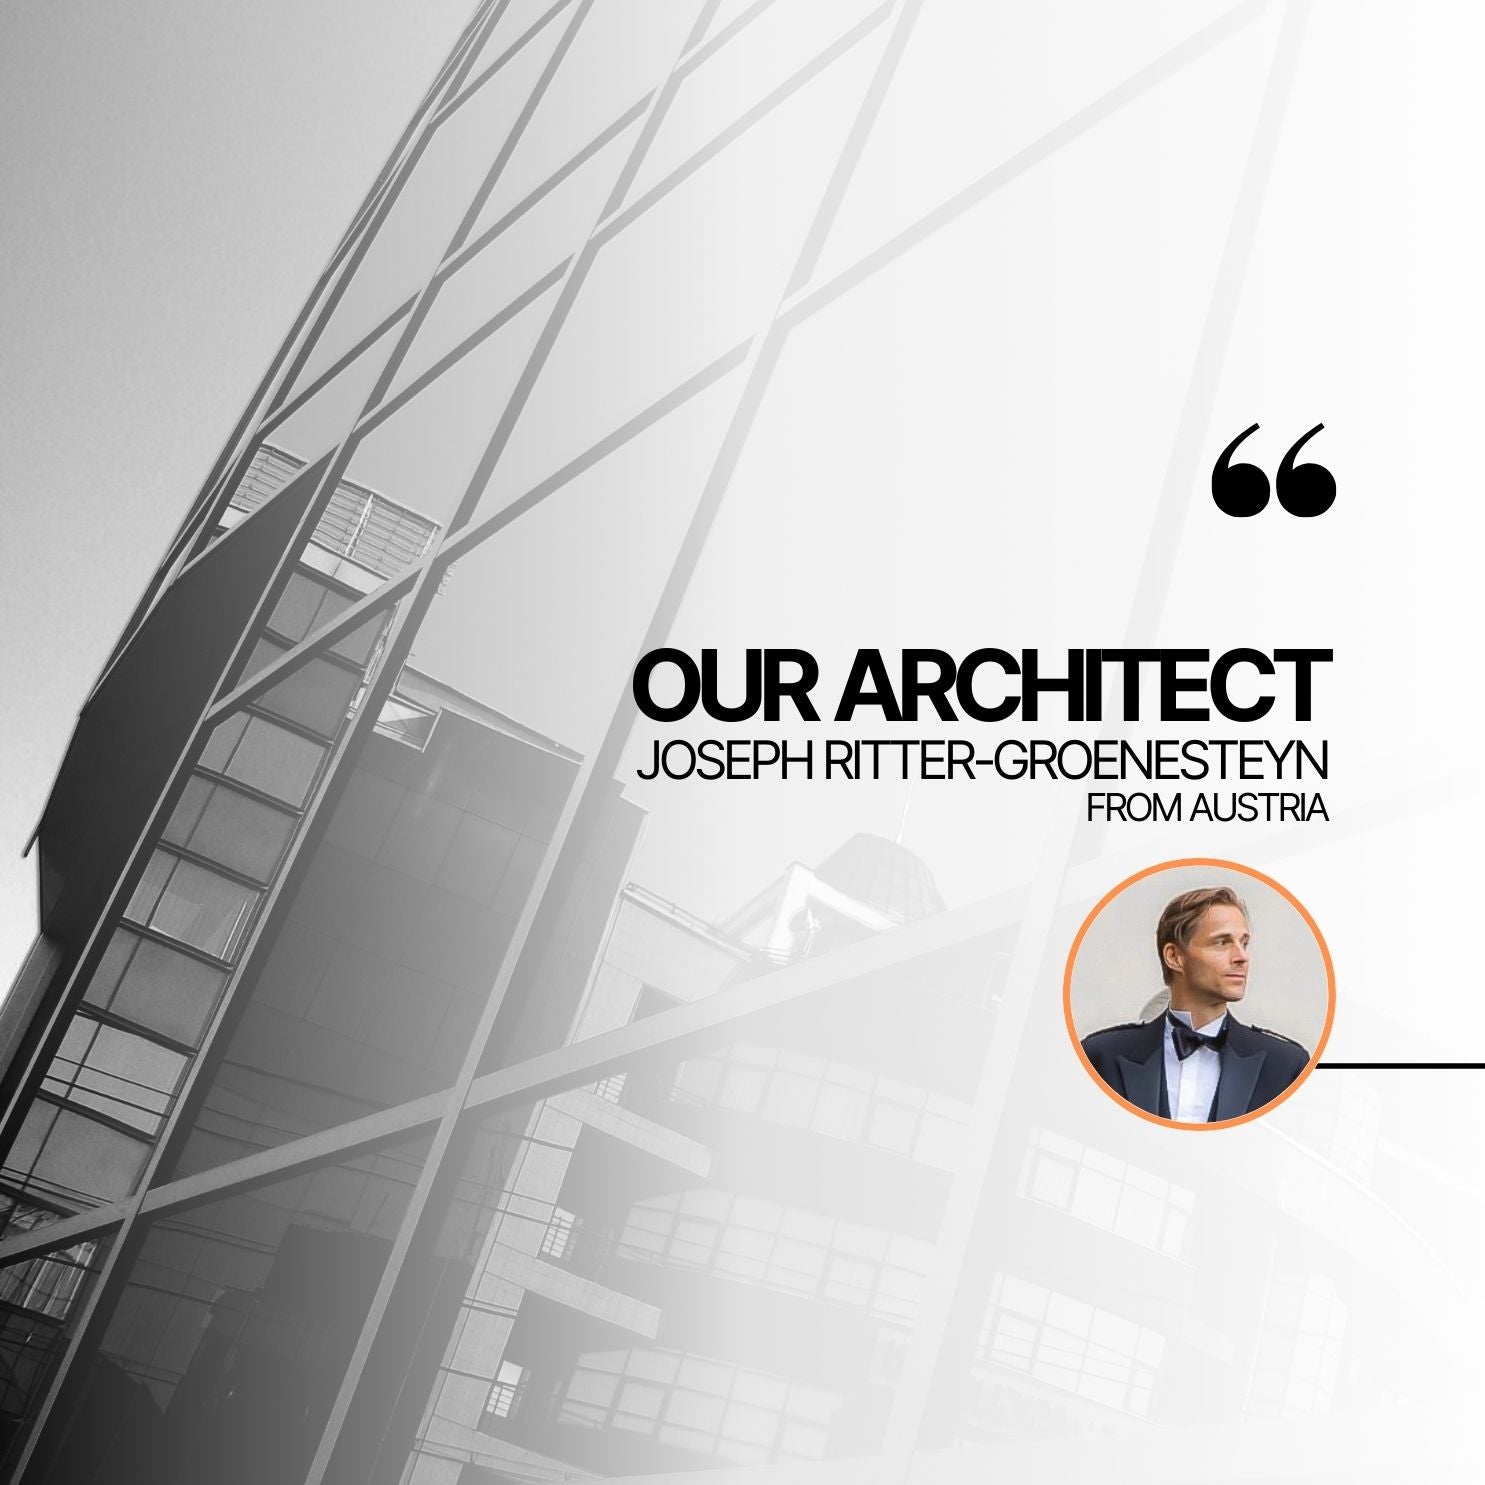 Guided by an acclaimed Austrian, Joseph Ritter-Groenesteyn architect and member of the European Architectural Association, our approach integrates rigorous standards from one of the world’s most challenging academic institutions. This expertise ensures that each project not only meets but exceeds the highest expectations of functionality and design excellence. With Blackstone Group Dubai, you invest in real estate that is not just built but meticulously crafted to enhance value and sustain long-term growth.